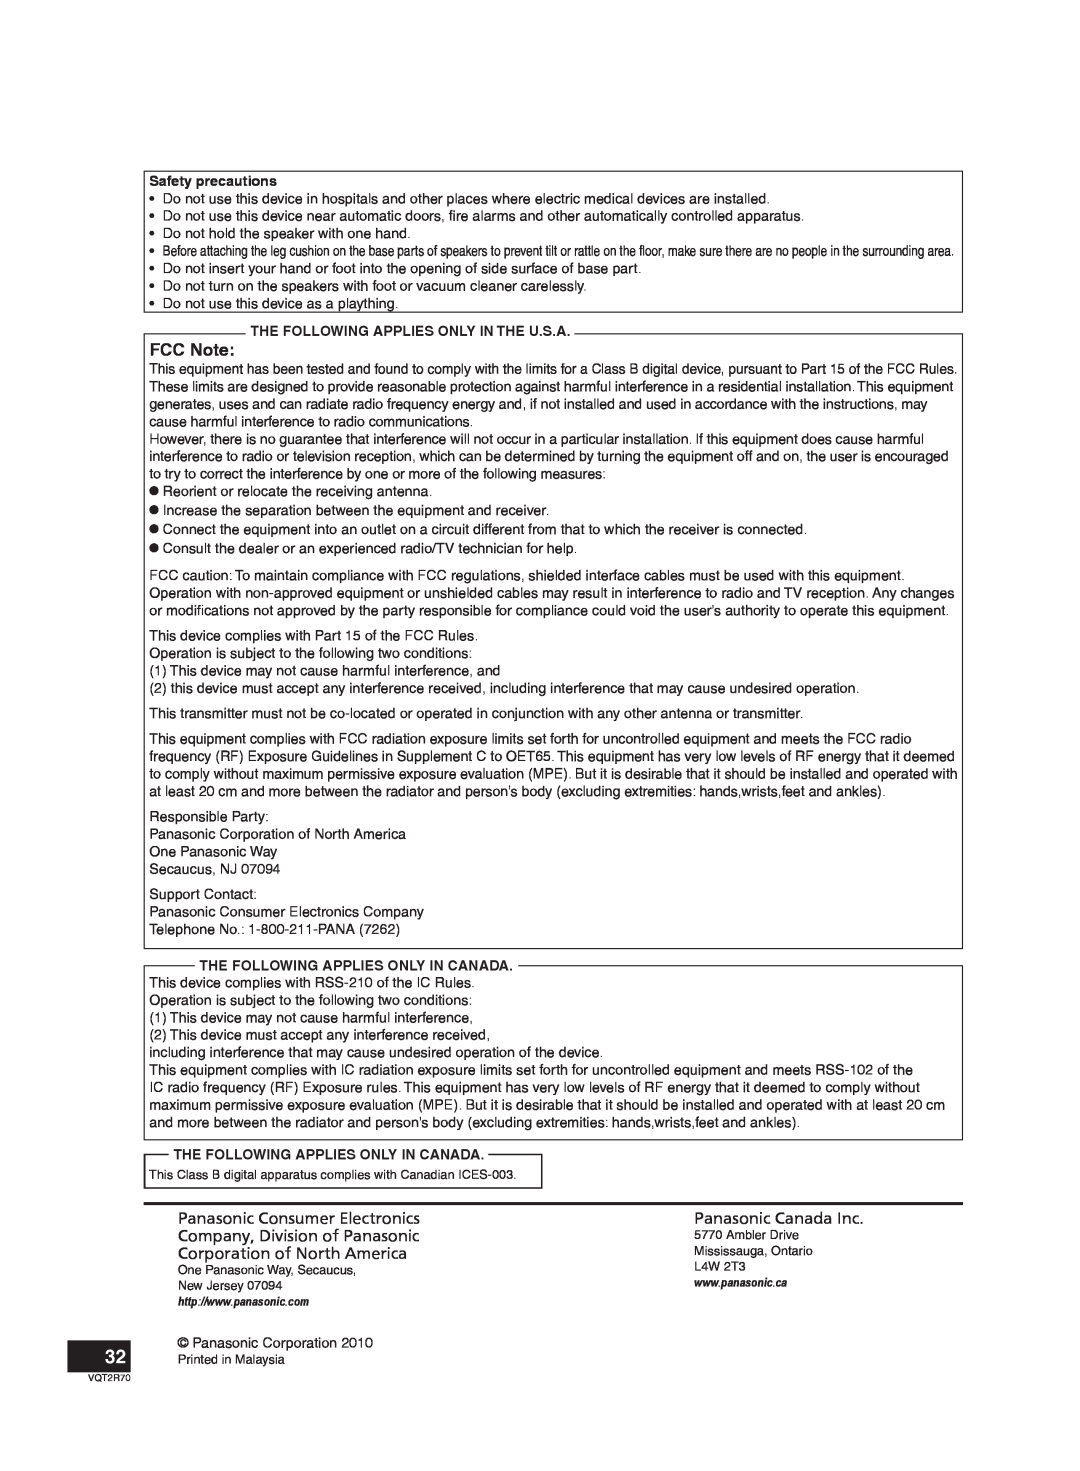 Panasonic SC-ZT2 warranty FCC Note, Safety precautions, The Following Applies Only In The U.S.A 